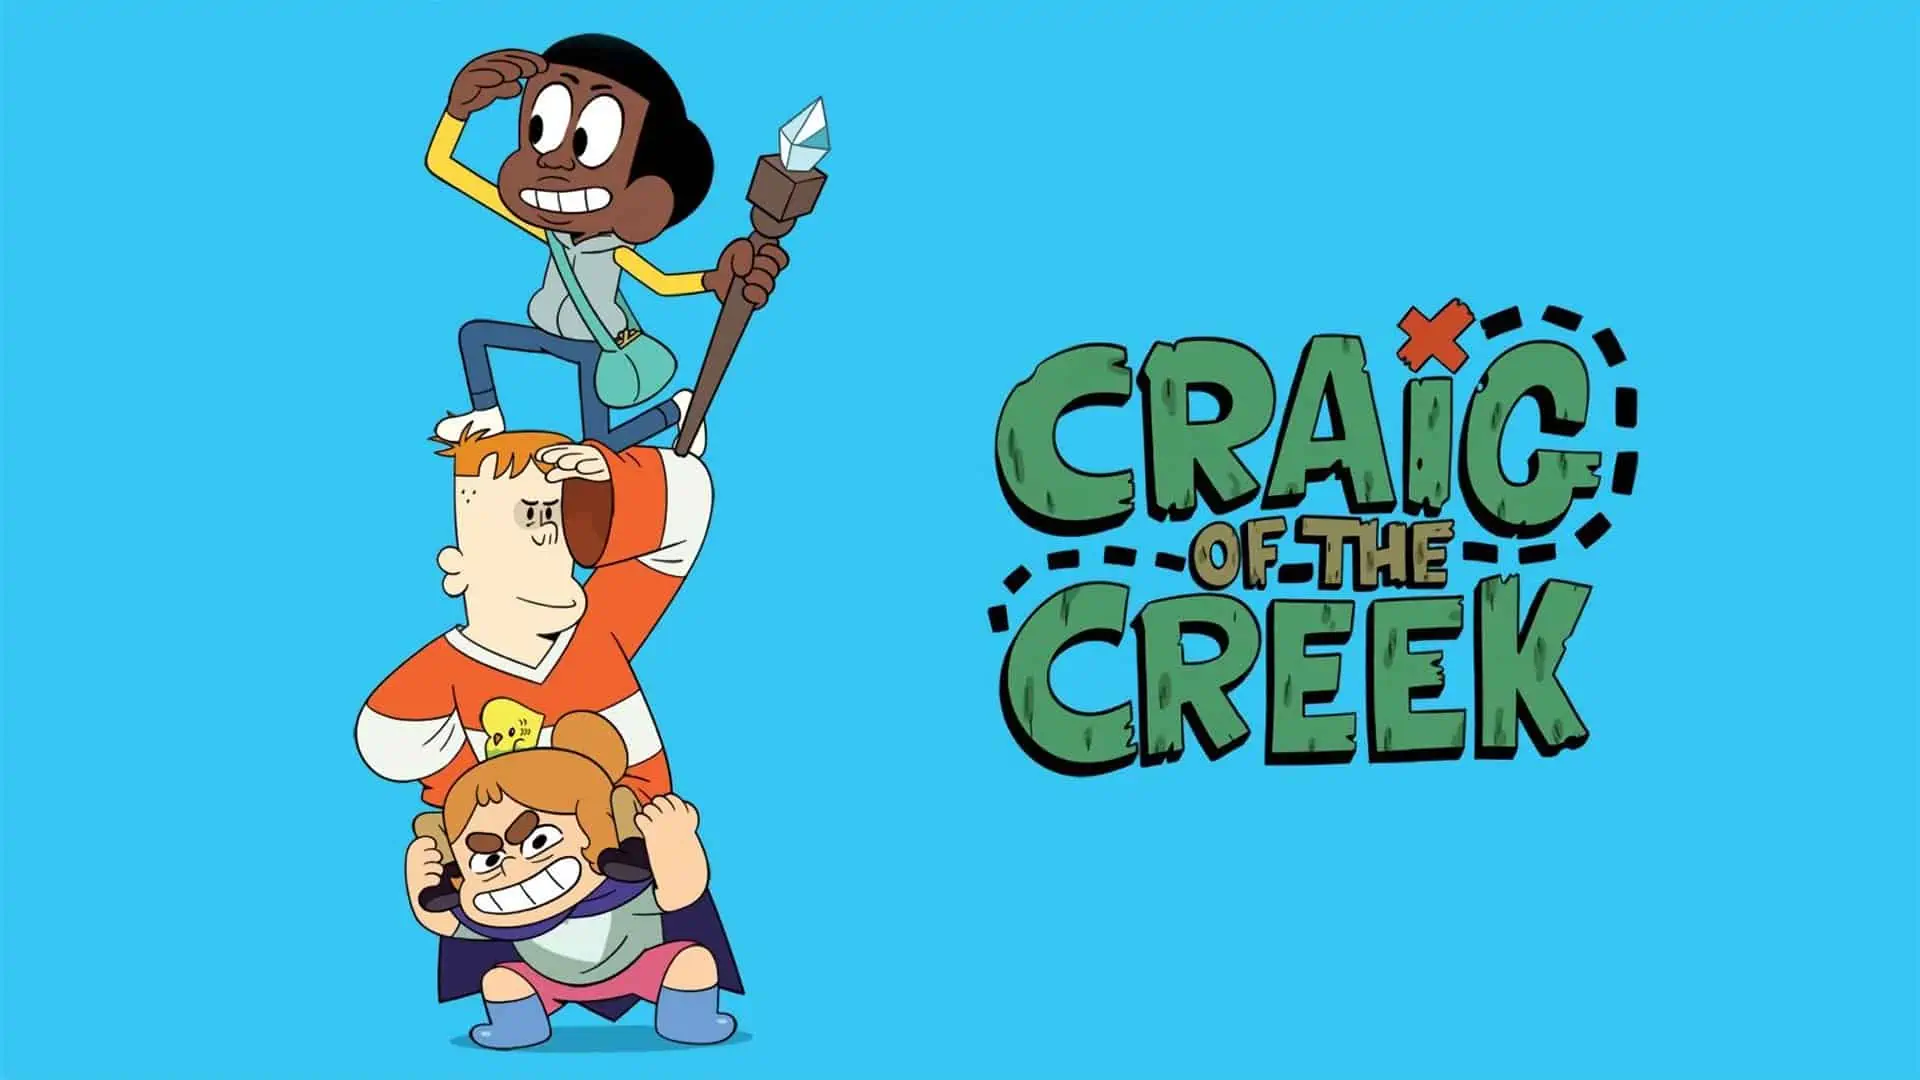 All About the Characters on “Craig of the Creek”